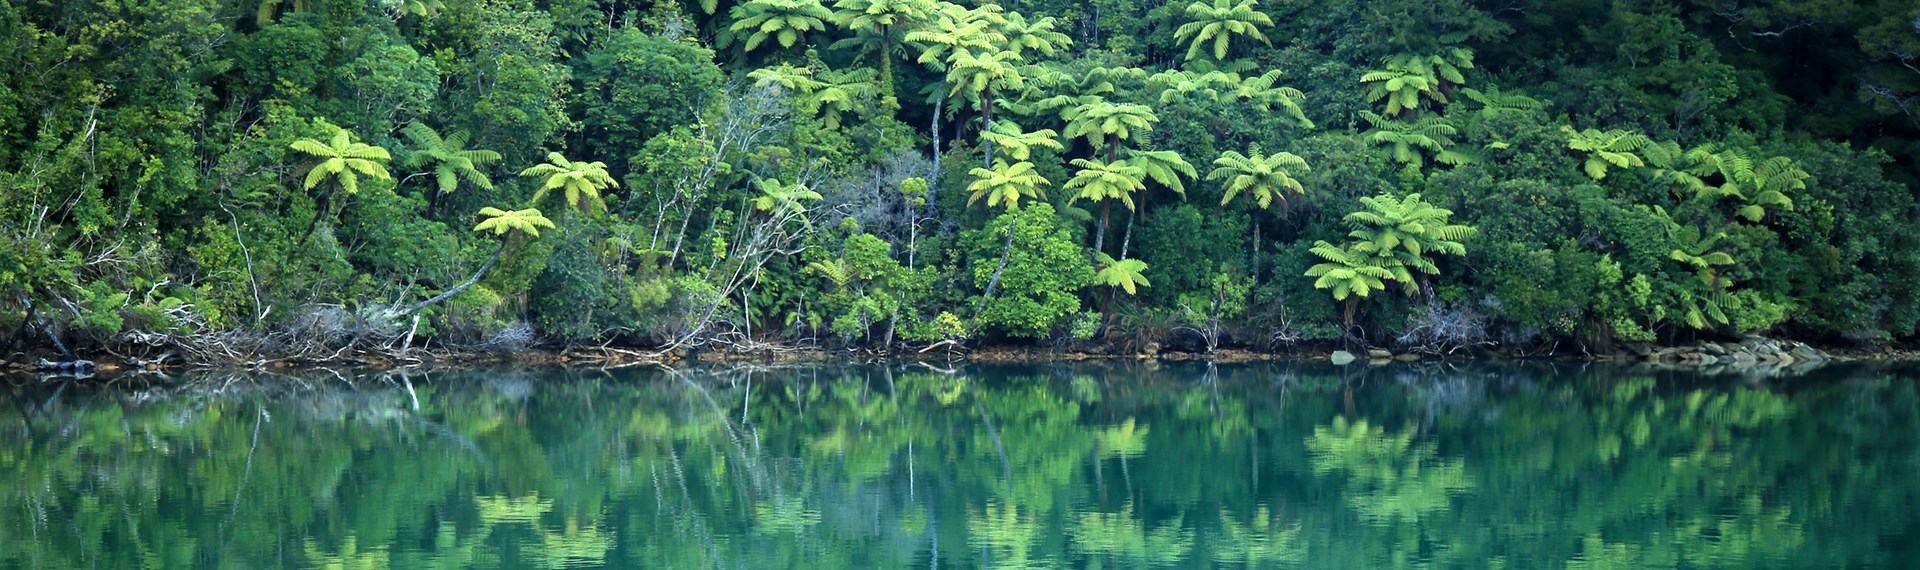 Lush green New Zealand punga tree ferns and bush are reflected in the tranquil blue waters of the Marlborough Sounds, New Zealand.